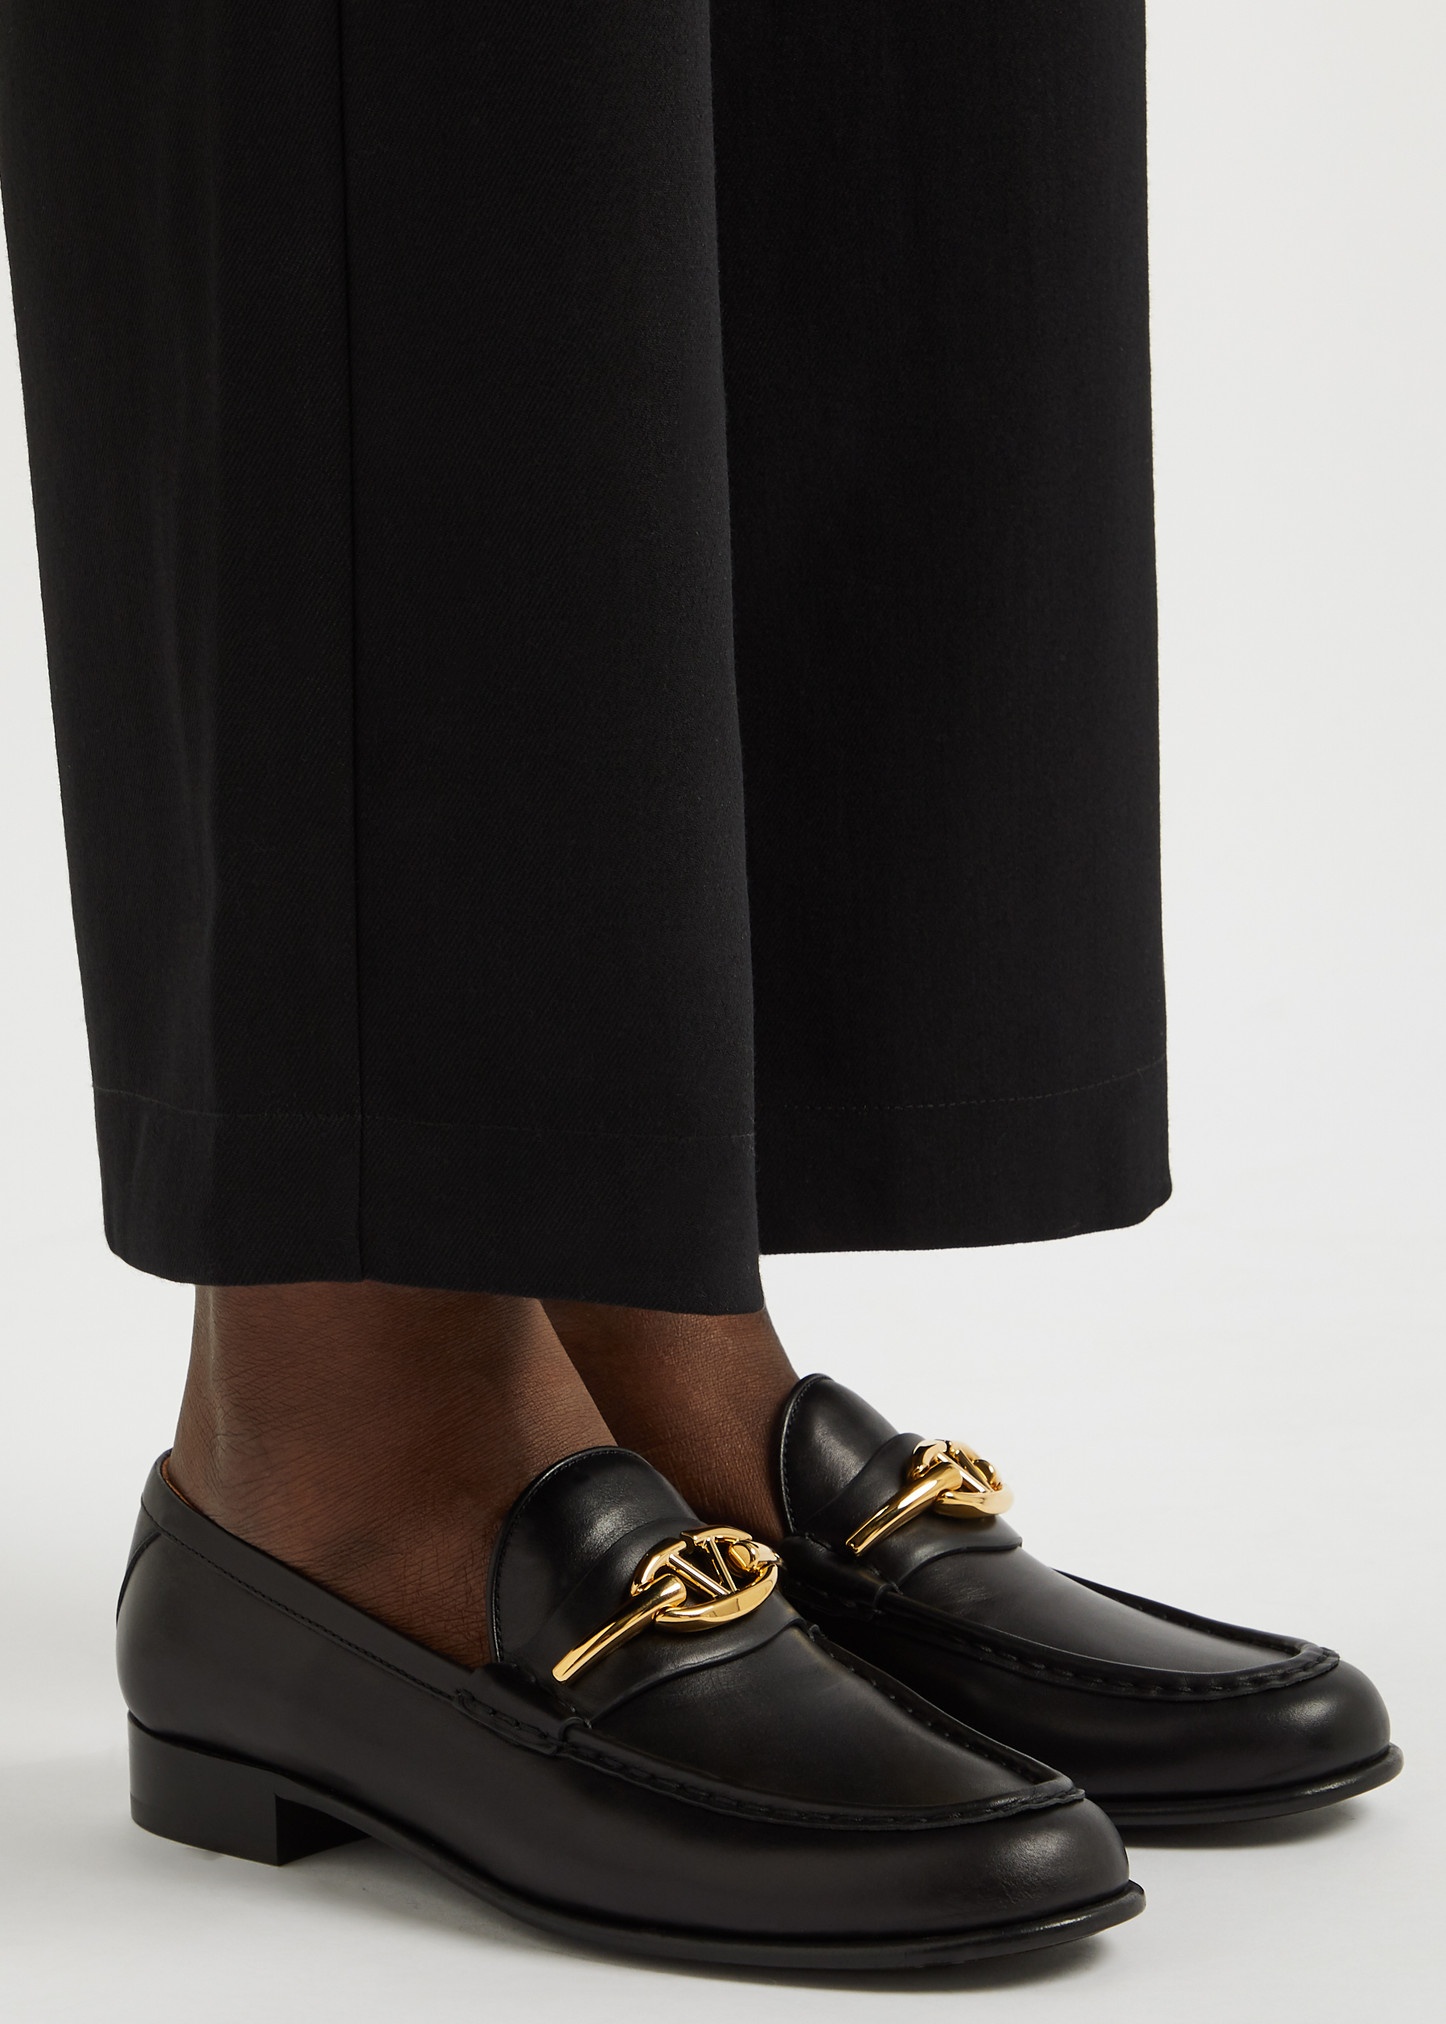 VLogo leather loafers - 5